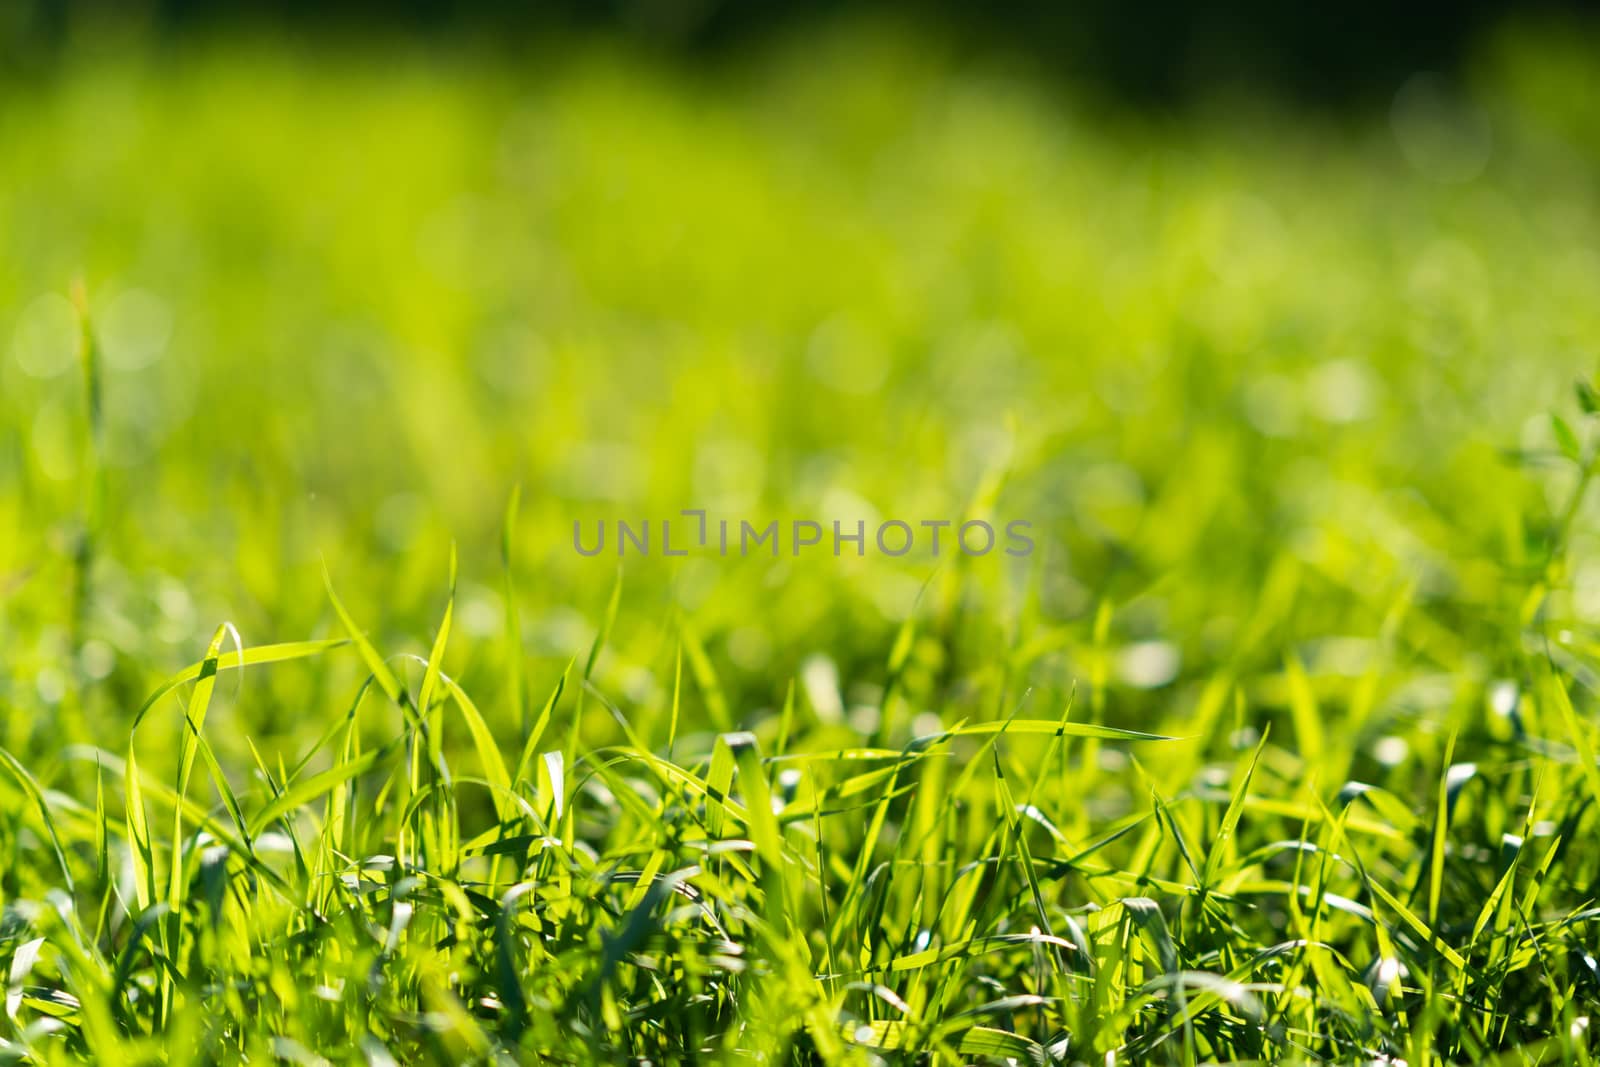 Very green and fresh grass. Symbol of freshness and natural. Brightness and hue colour. Close-up view. by alexsdriver